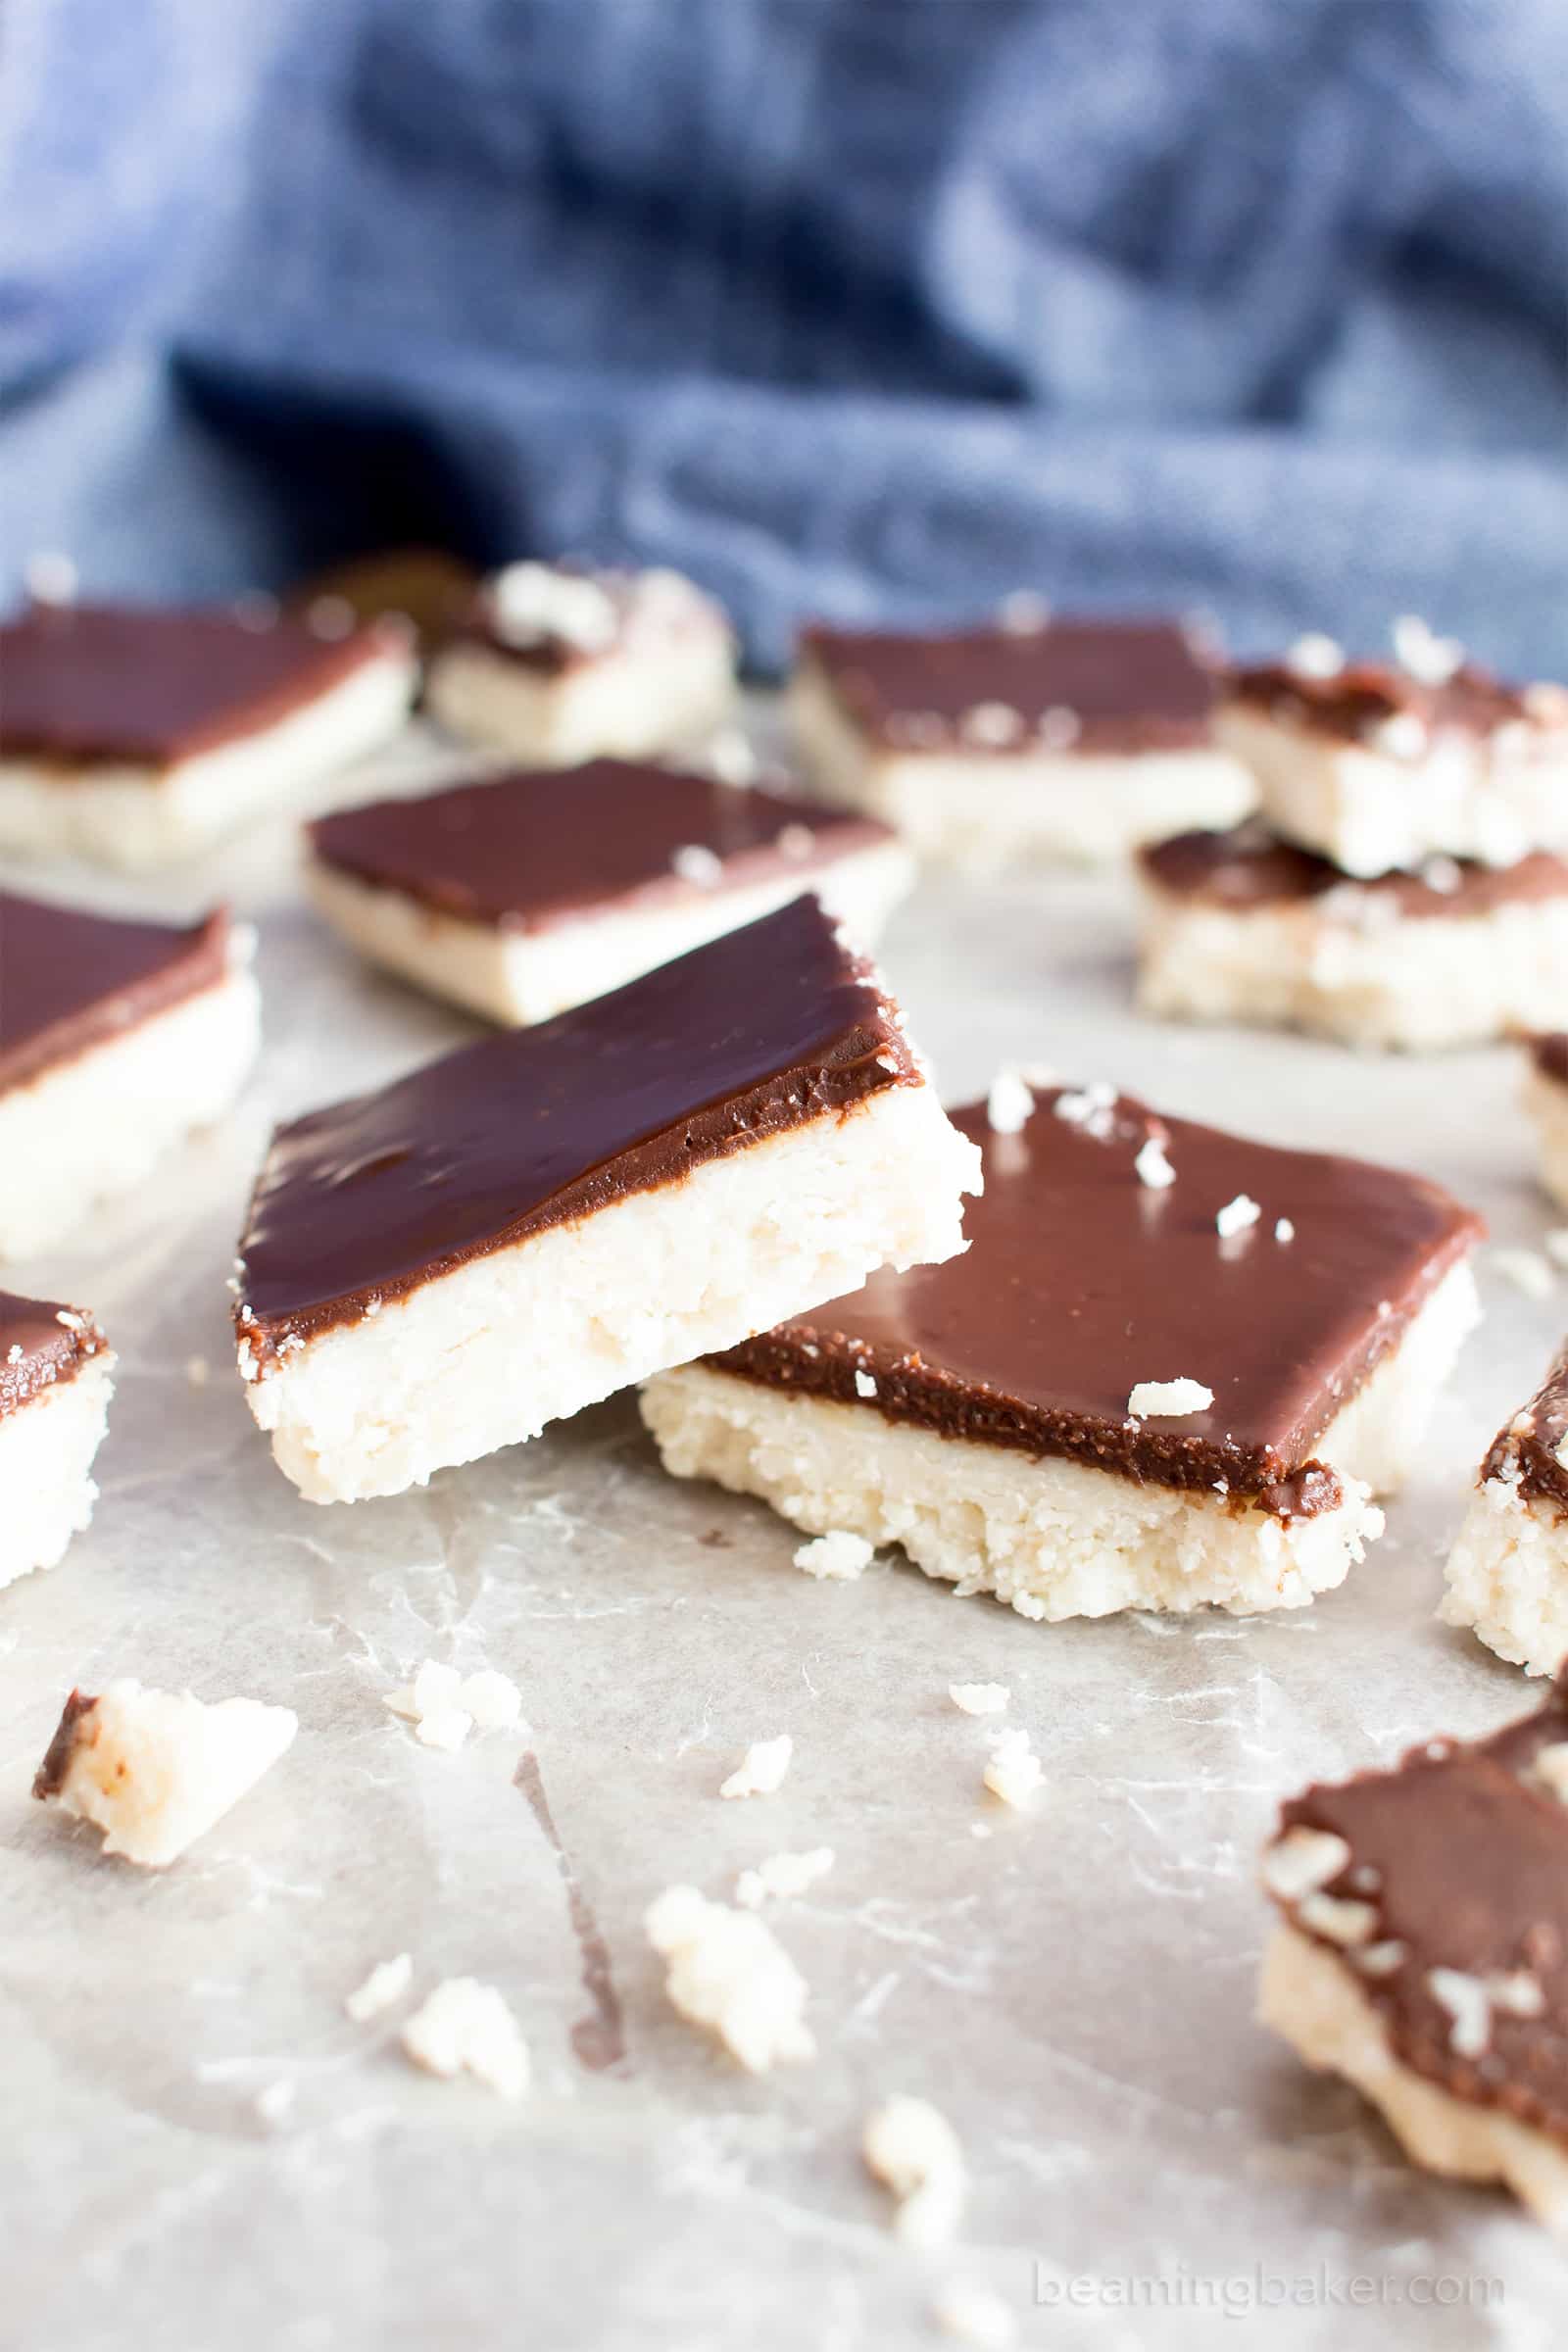 Vegan Coconut Chocolate Bars: this 5 ingredient coconut bars recipe yields thick, indulgent coconut bars enrobed in a velvety layer of rich chocolate. Healthy, Paleo, No Bake, Gluten Free. #Coconut #Bars #Vegan #Chocolate | Recipe at BeamingBaker.com